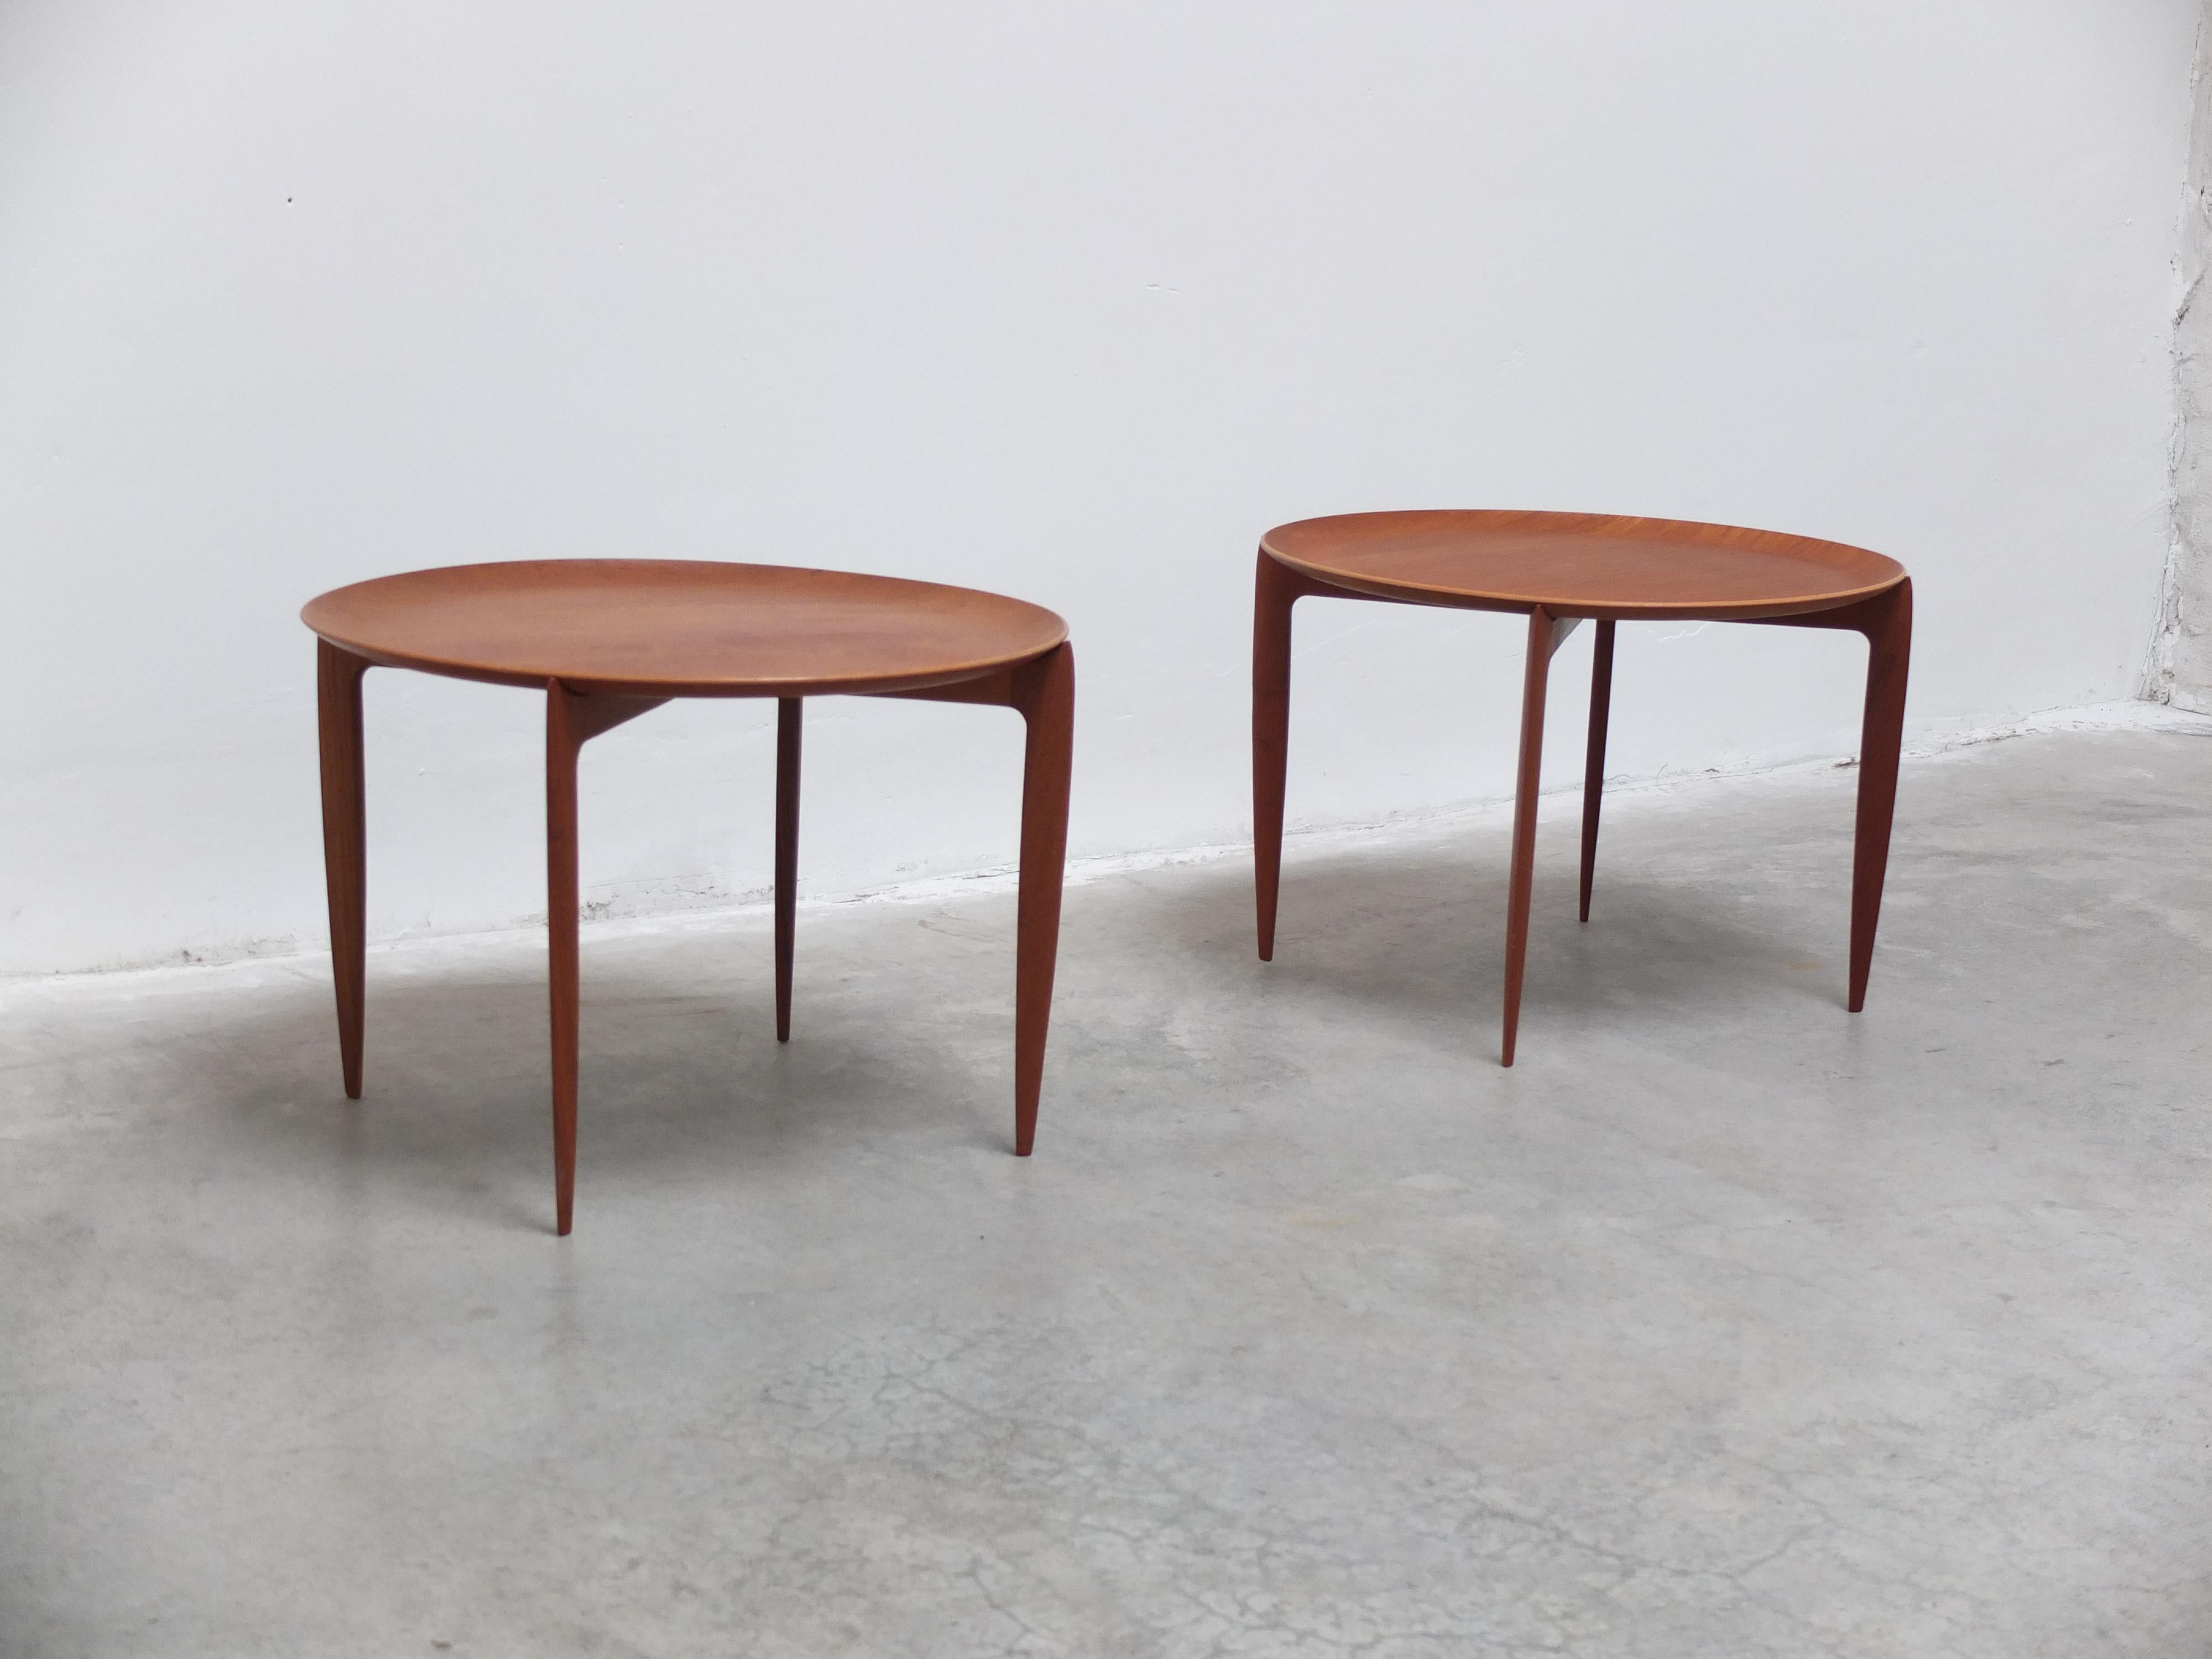 Scandinavian Modern Early Pair of Tray Tables in Teak by Willumsen & Engholm for Fritz Hansen, 1958